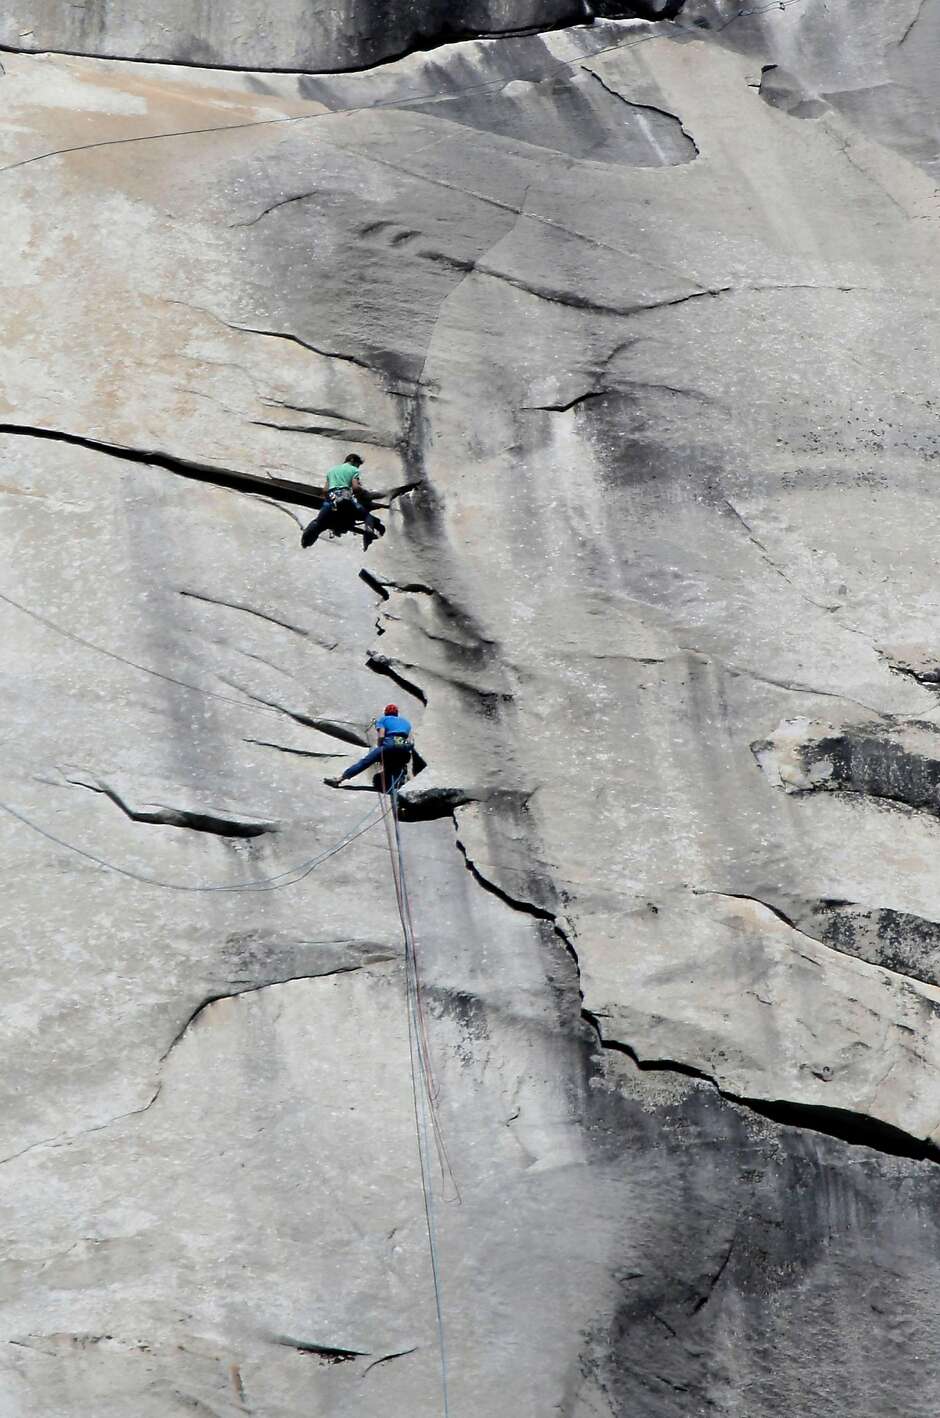 Witness to death plunge of 2 climbers on El Capitan describes horrific